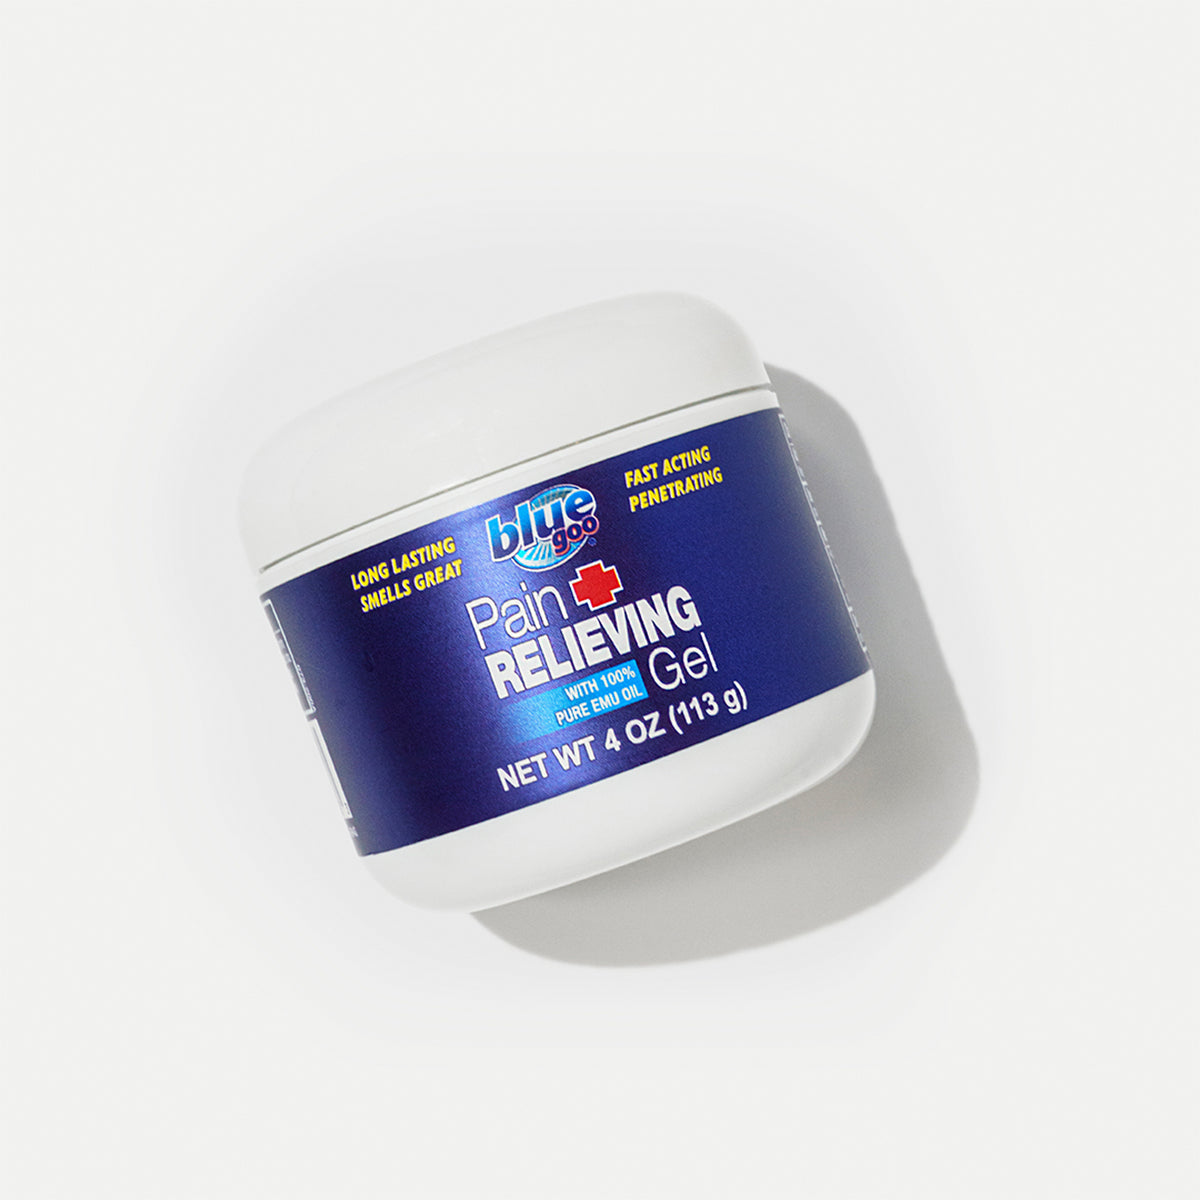 Pain Relieving Gel (4 oz.)